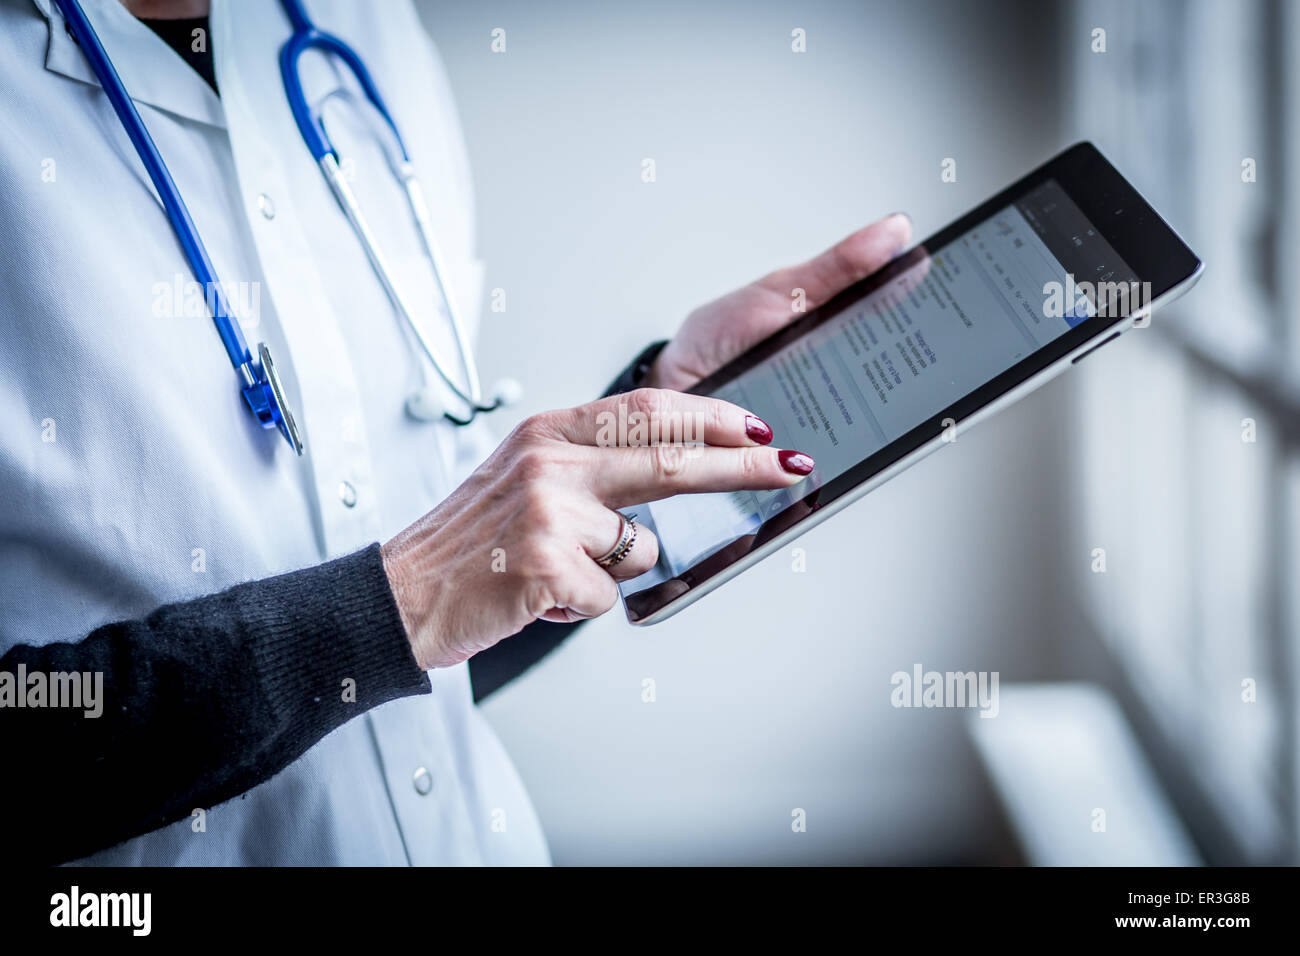 Doctor using a tablet PC. Stock Photo